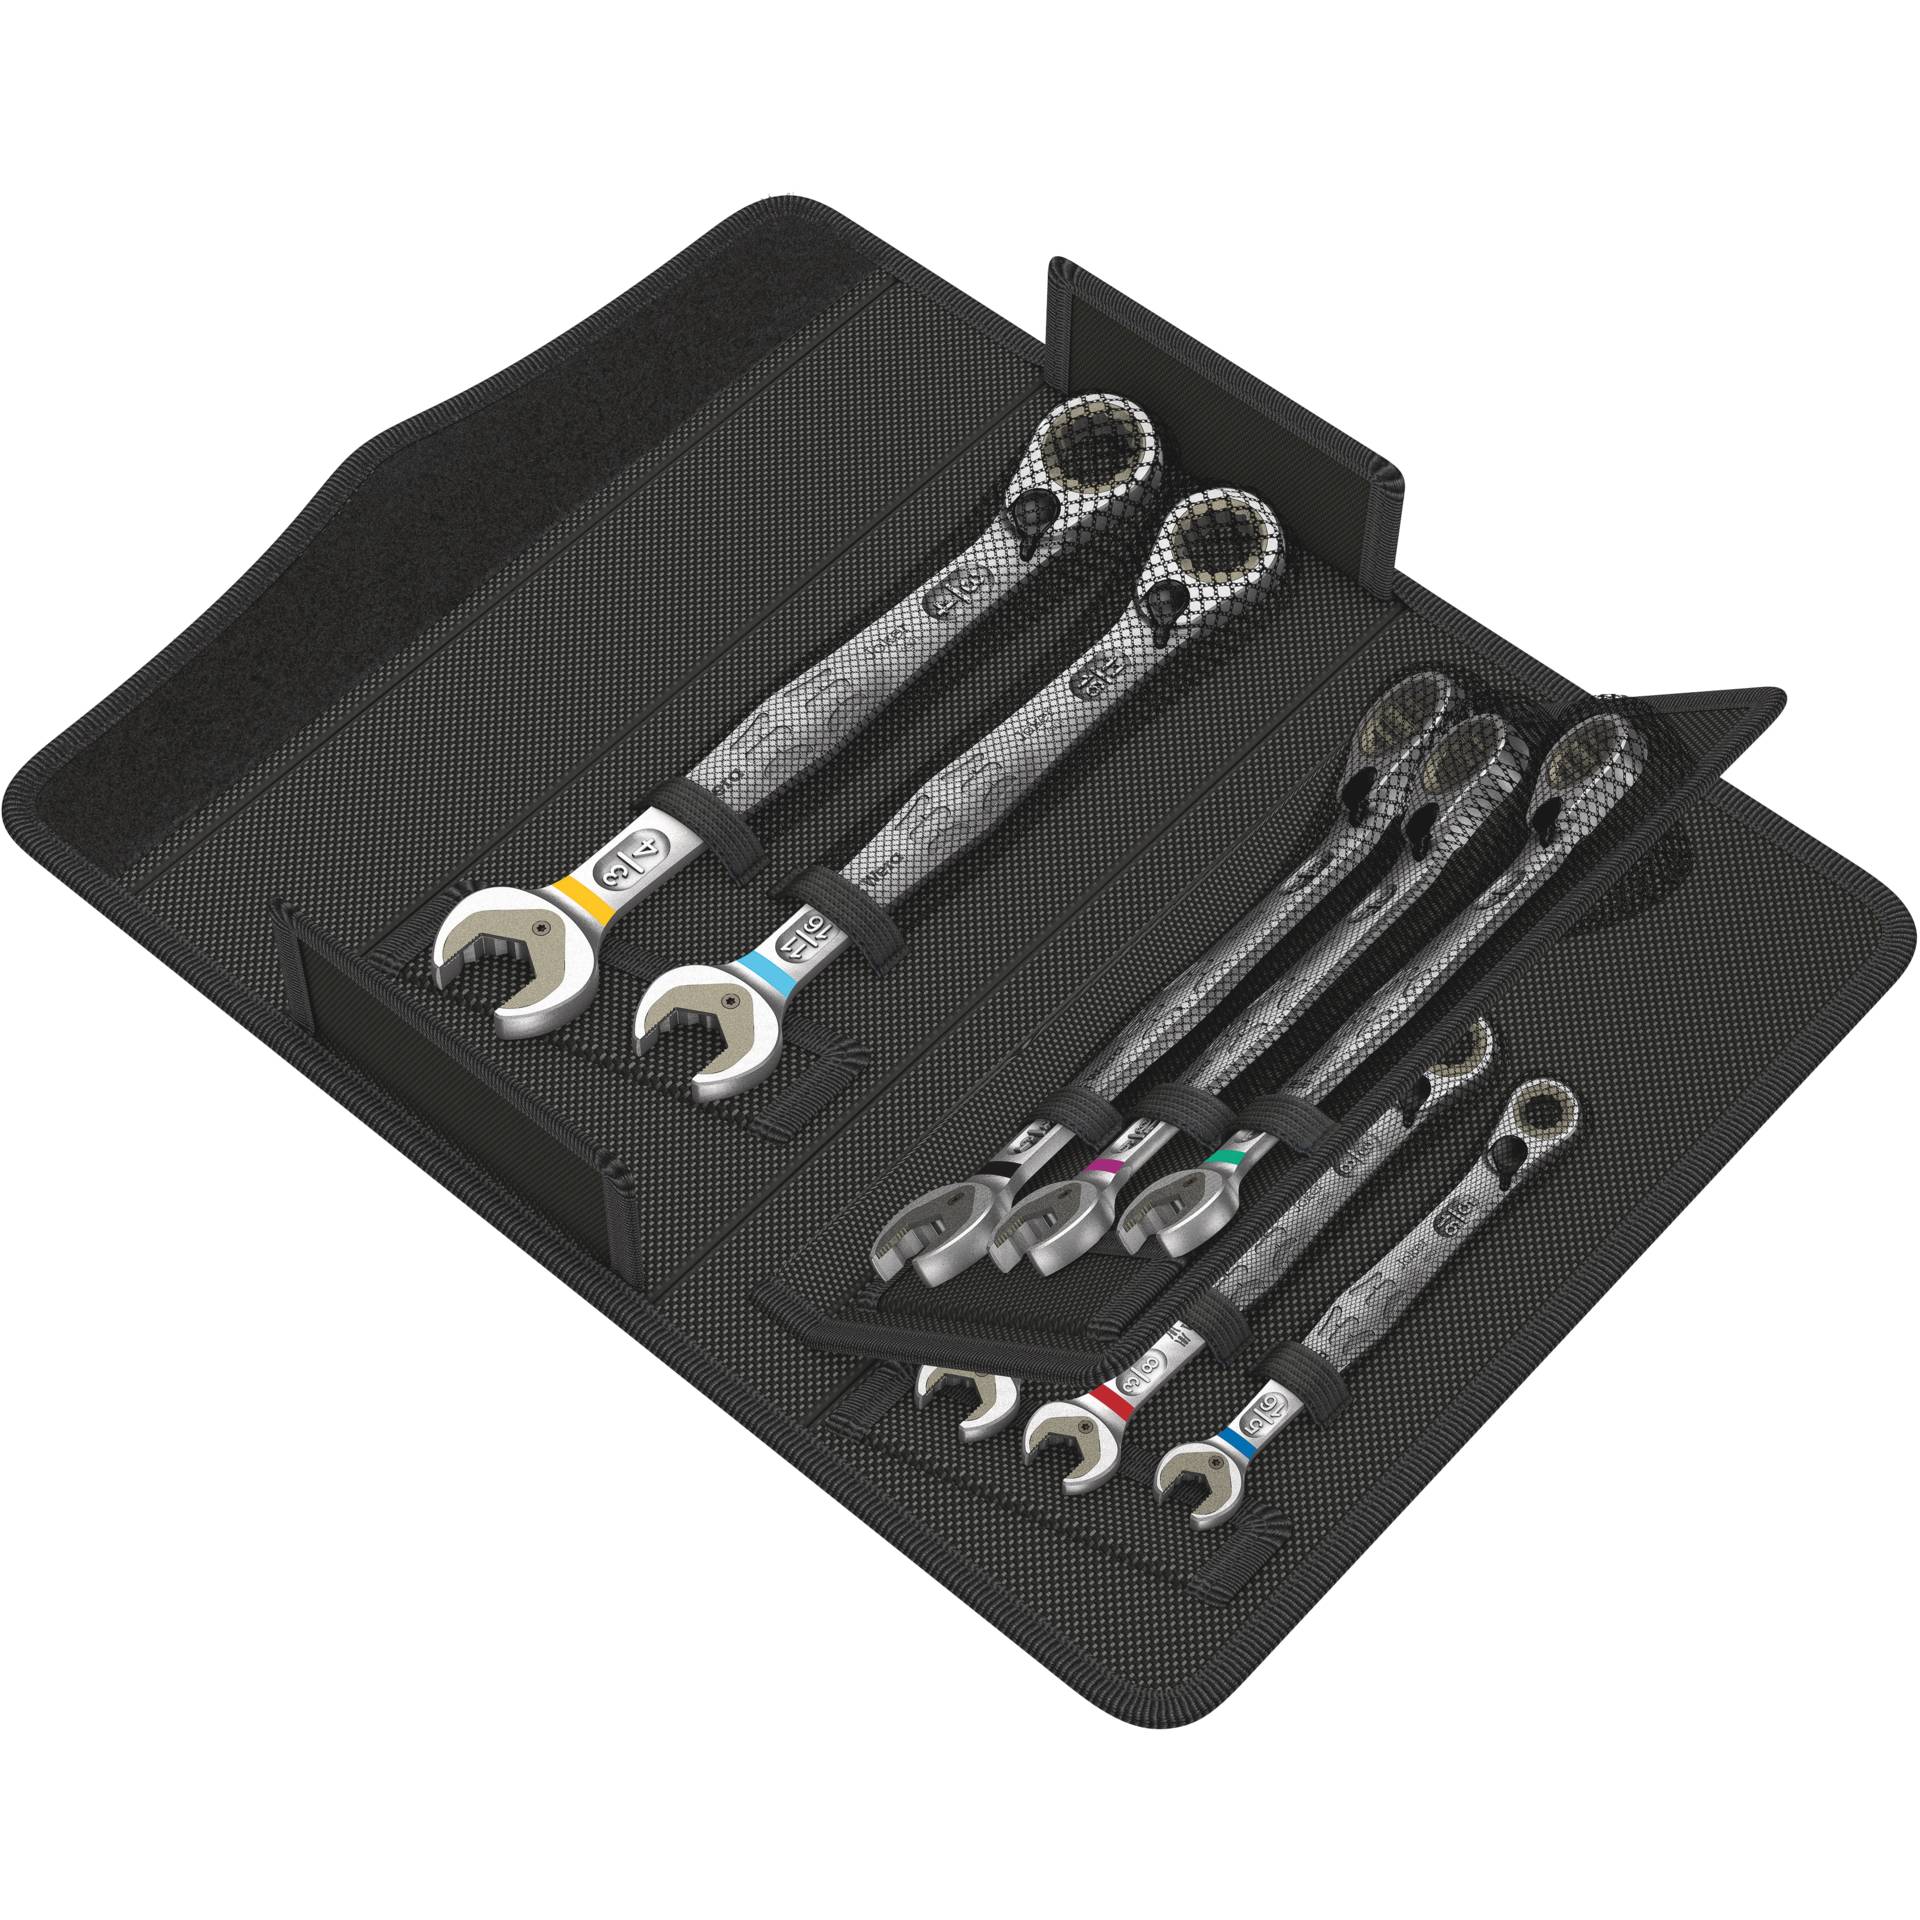 Wera 6001 Joker Switch 8 Set Ratchet. Comb. Wrenches Imperia